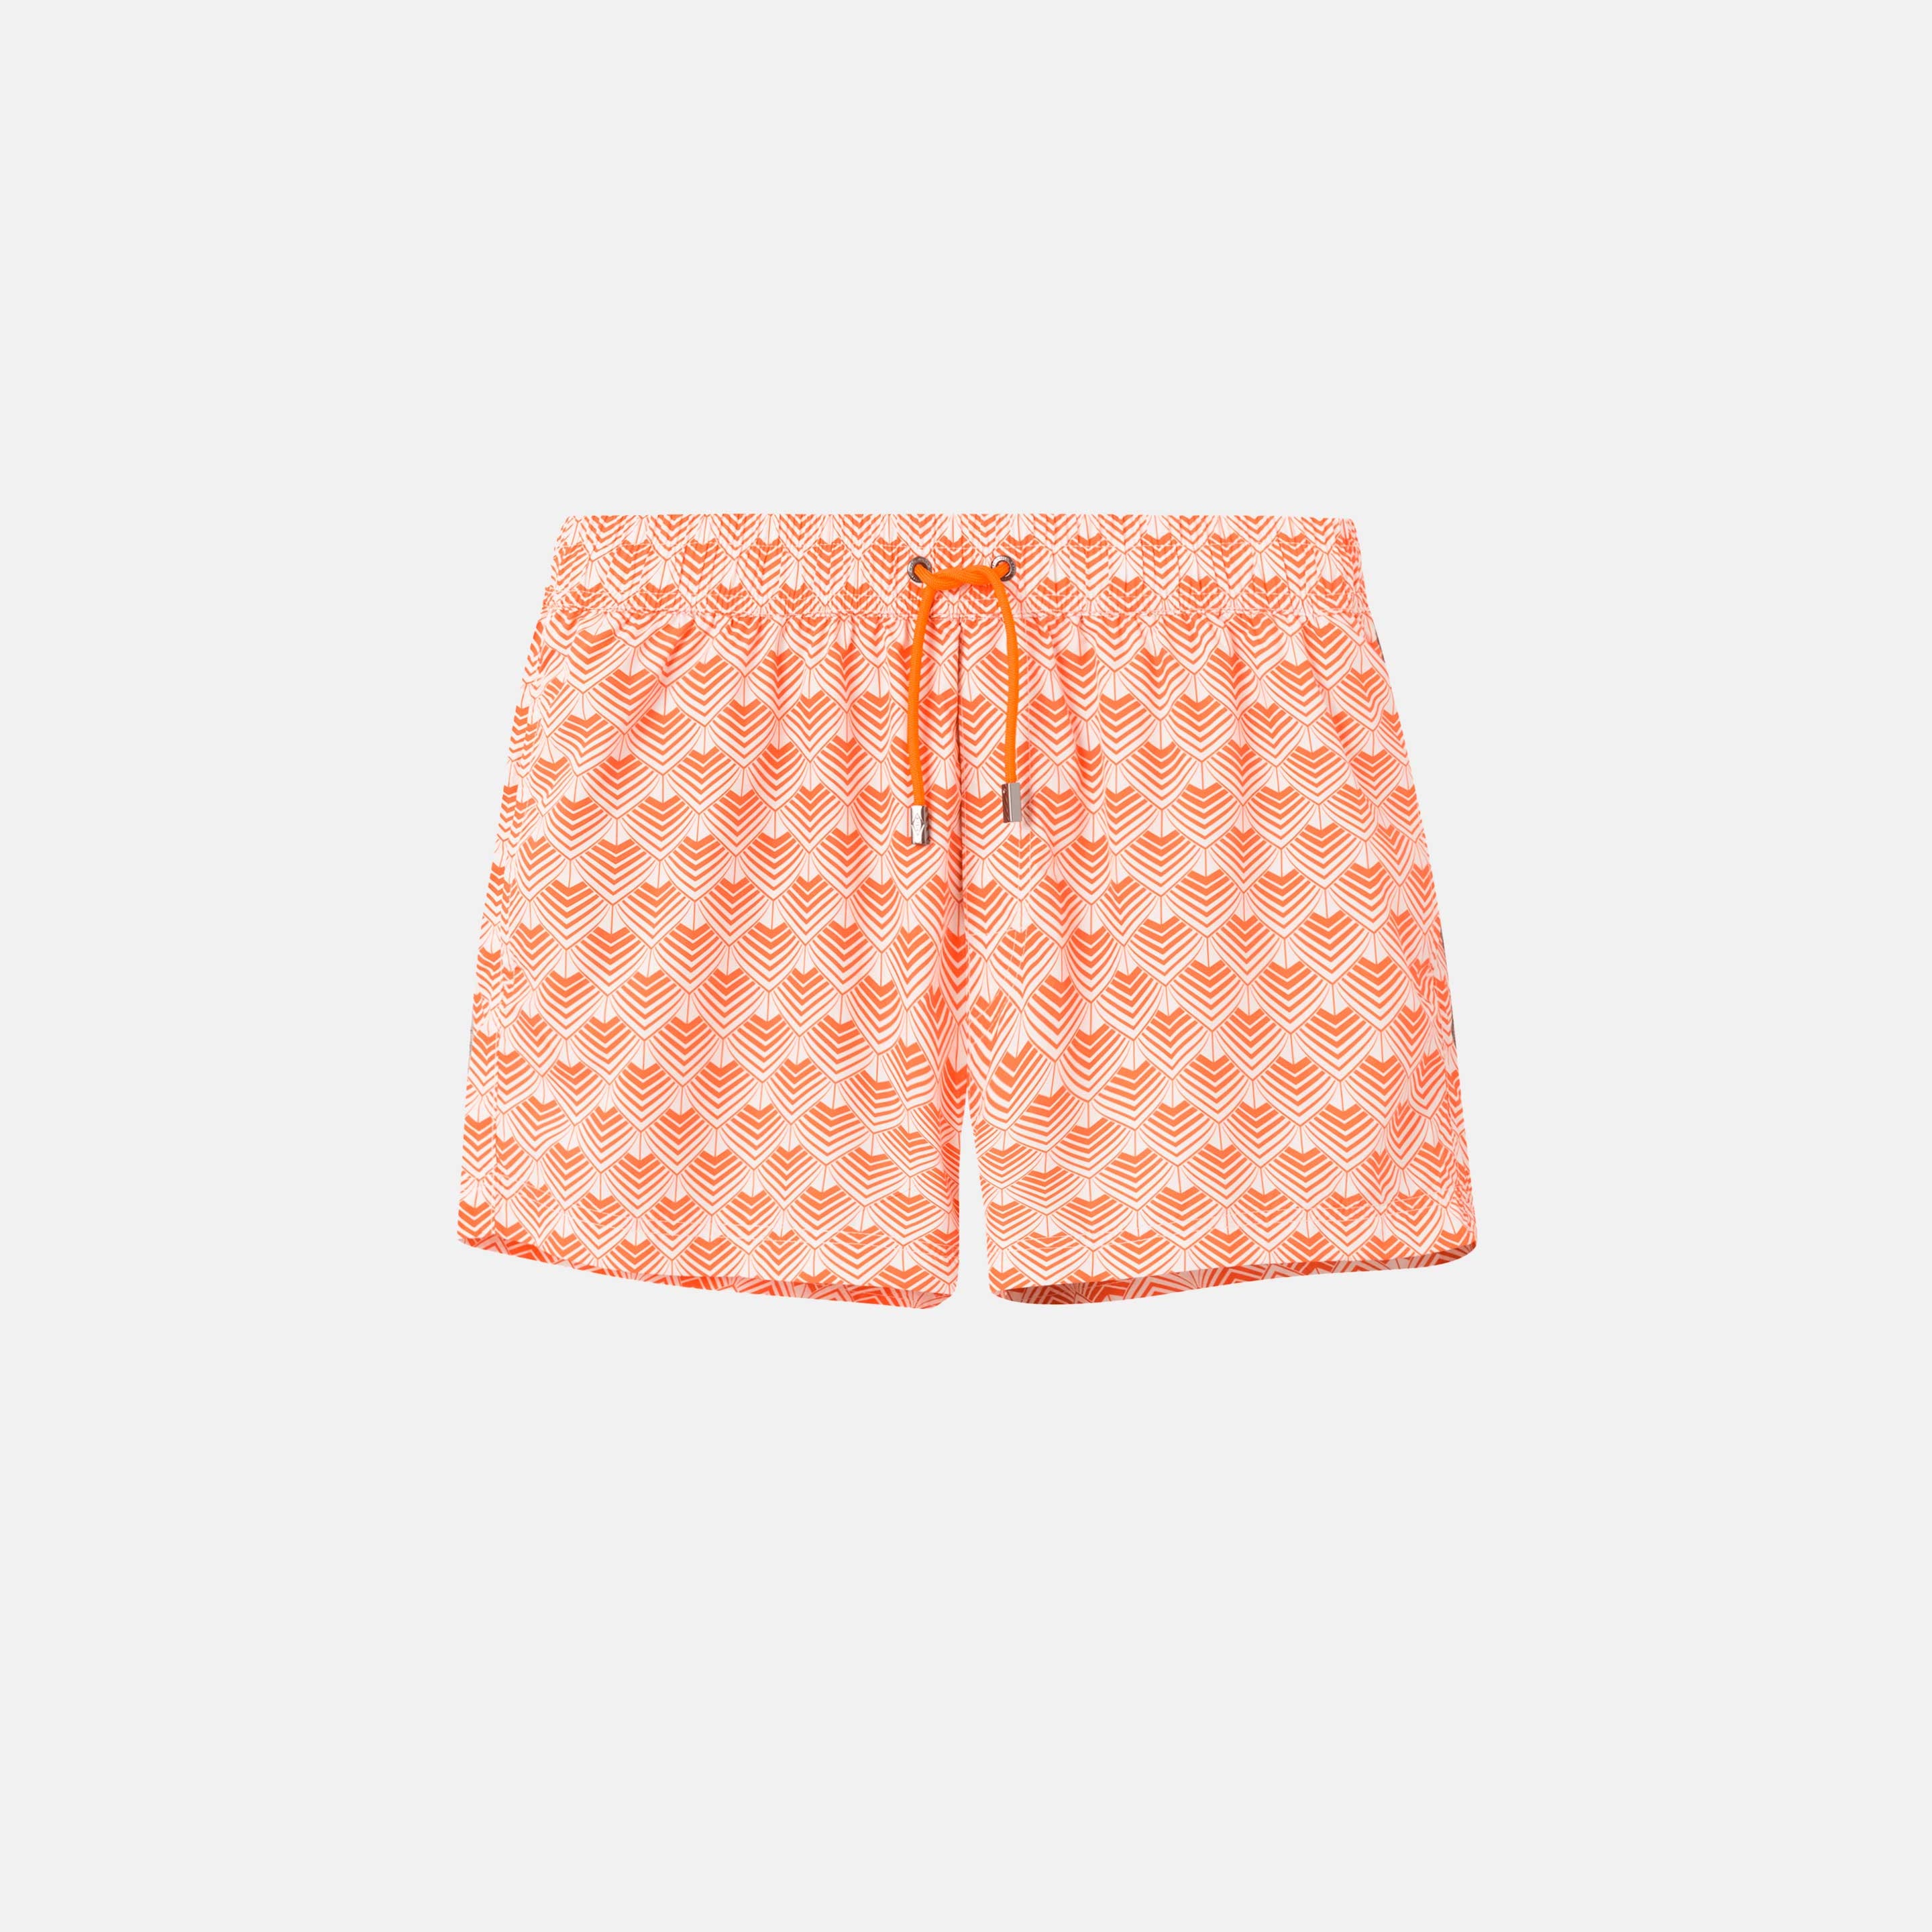 Orange and white patterned swimming trunks. Short length with drawstring and two side pockets.